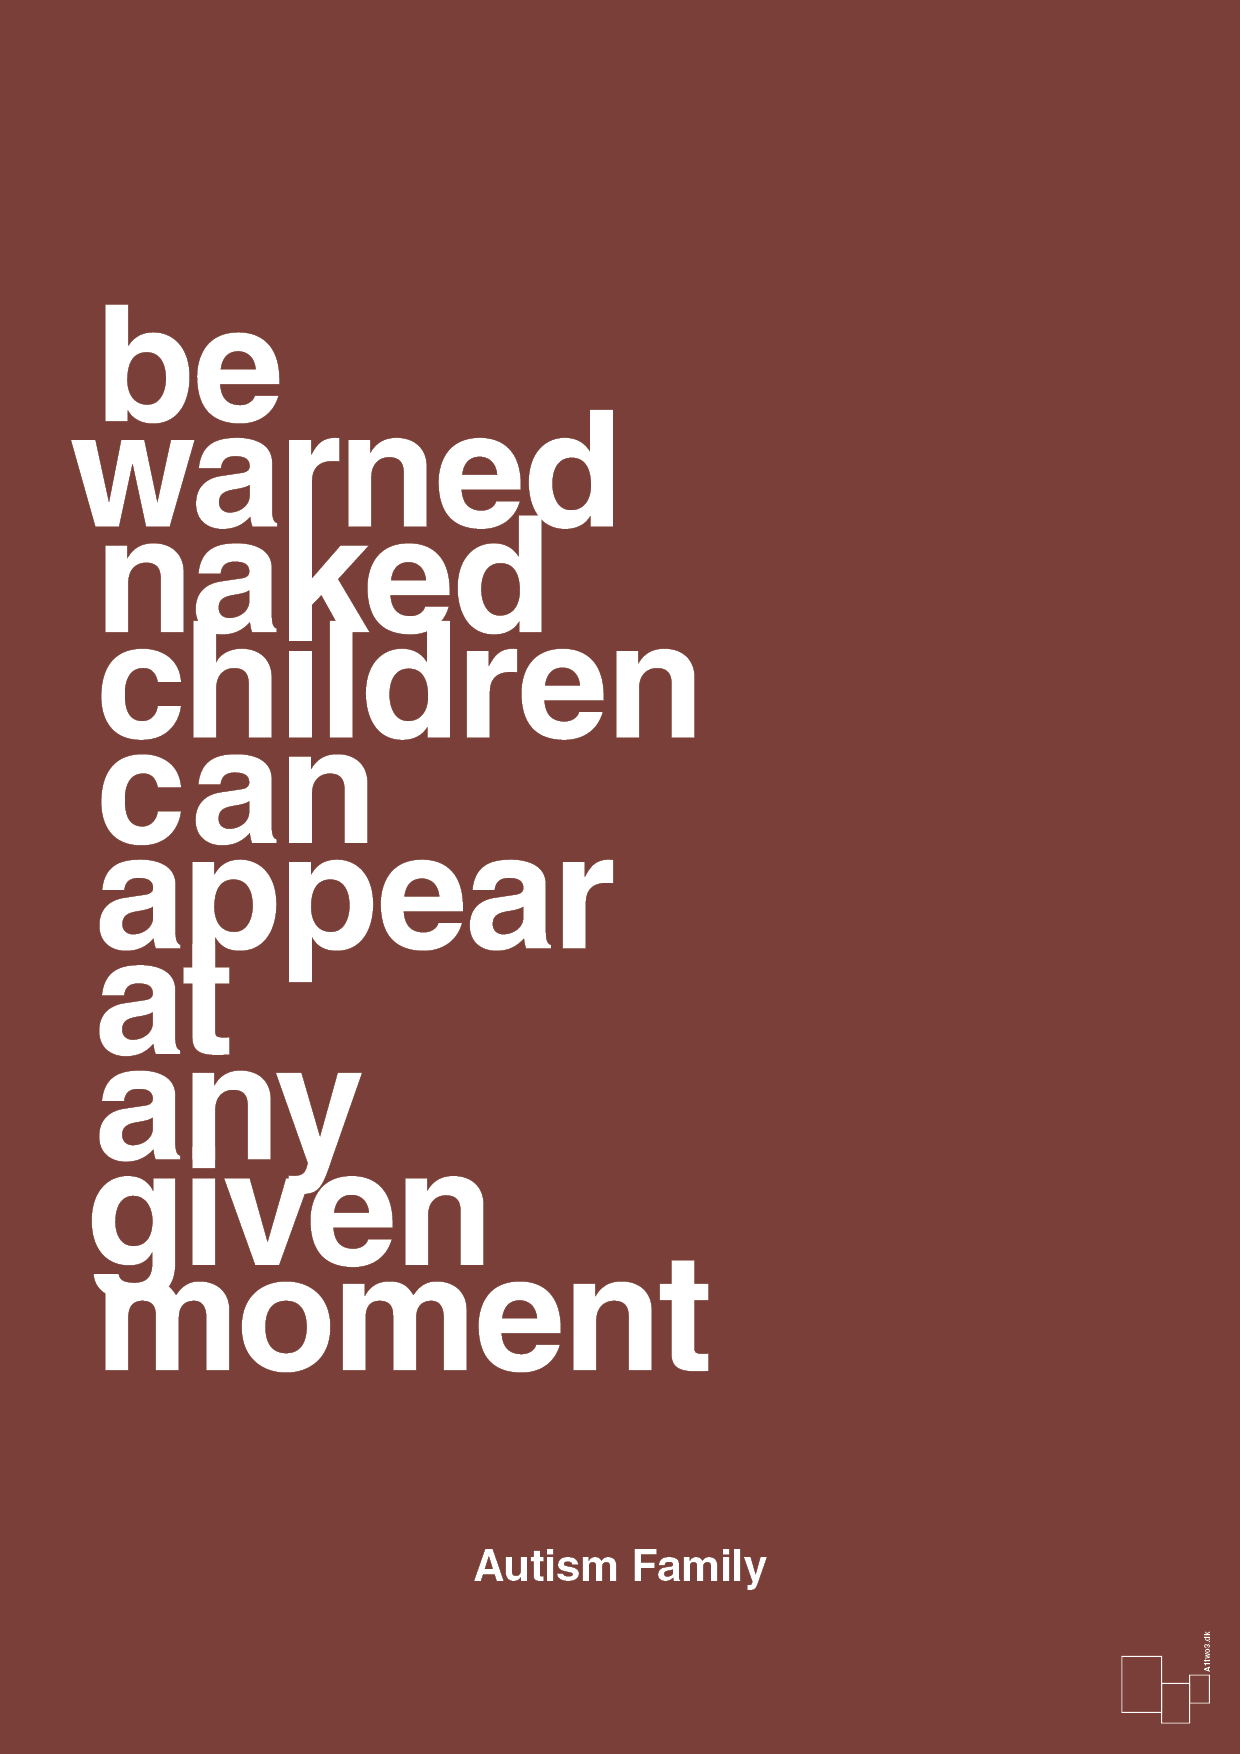 be warned naked children can appear at any given moment - Plakat med Samfund i Red Pepper